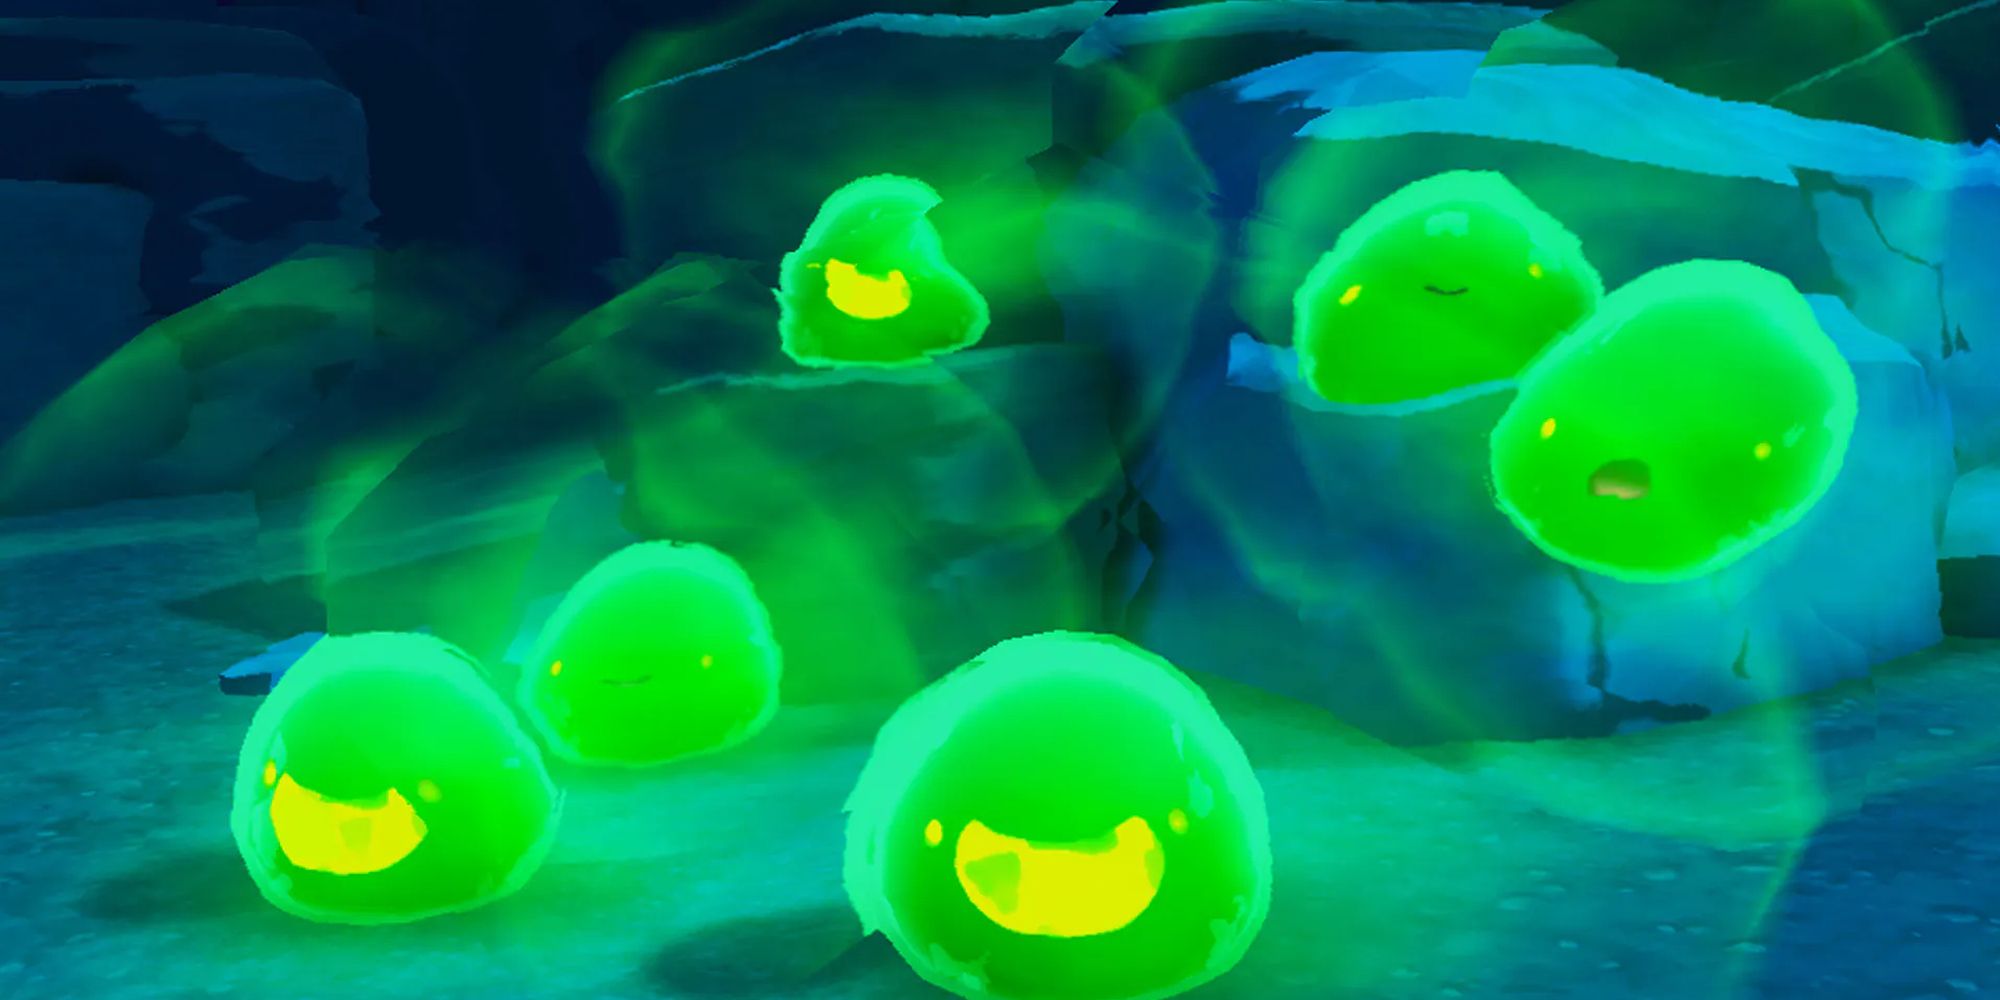 A Party Of Rad Slimes